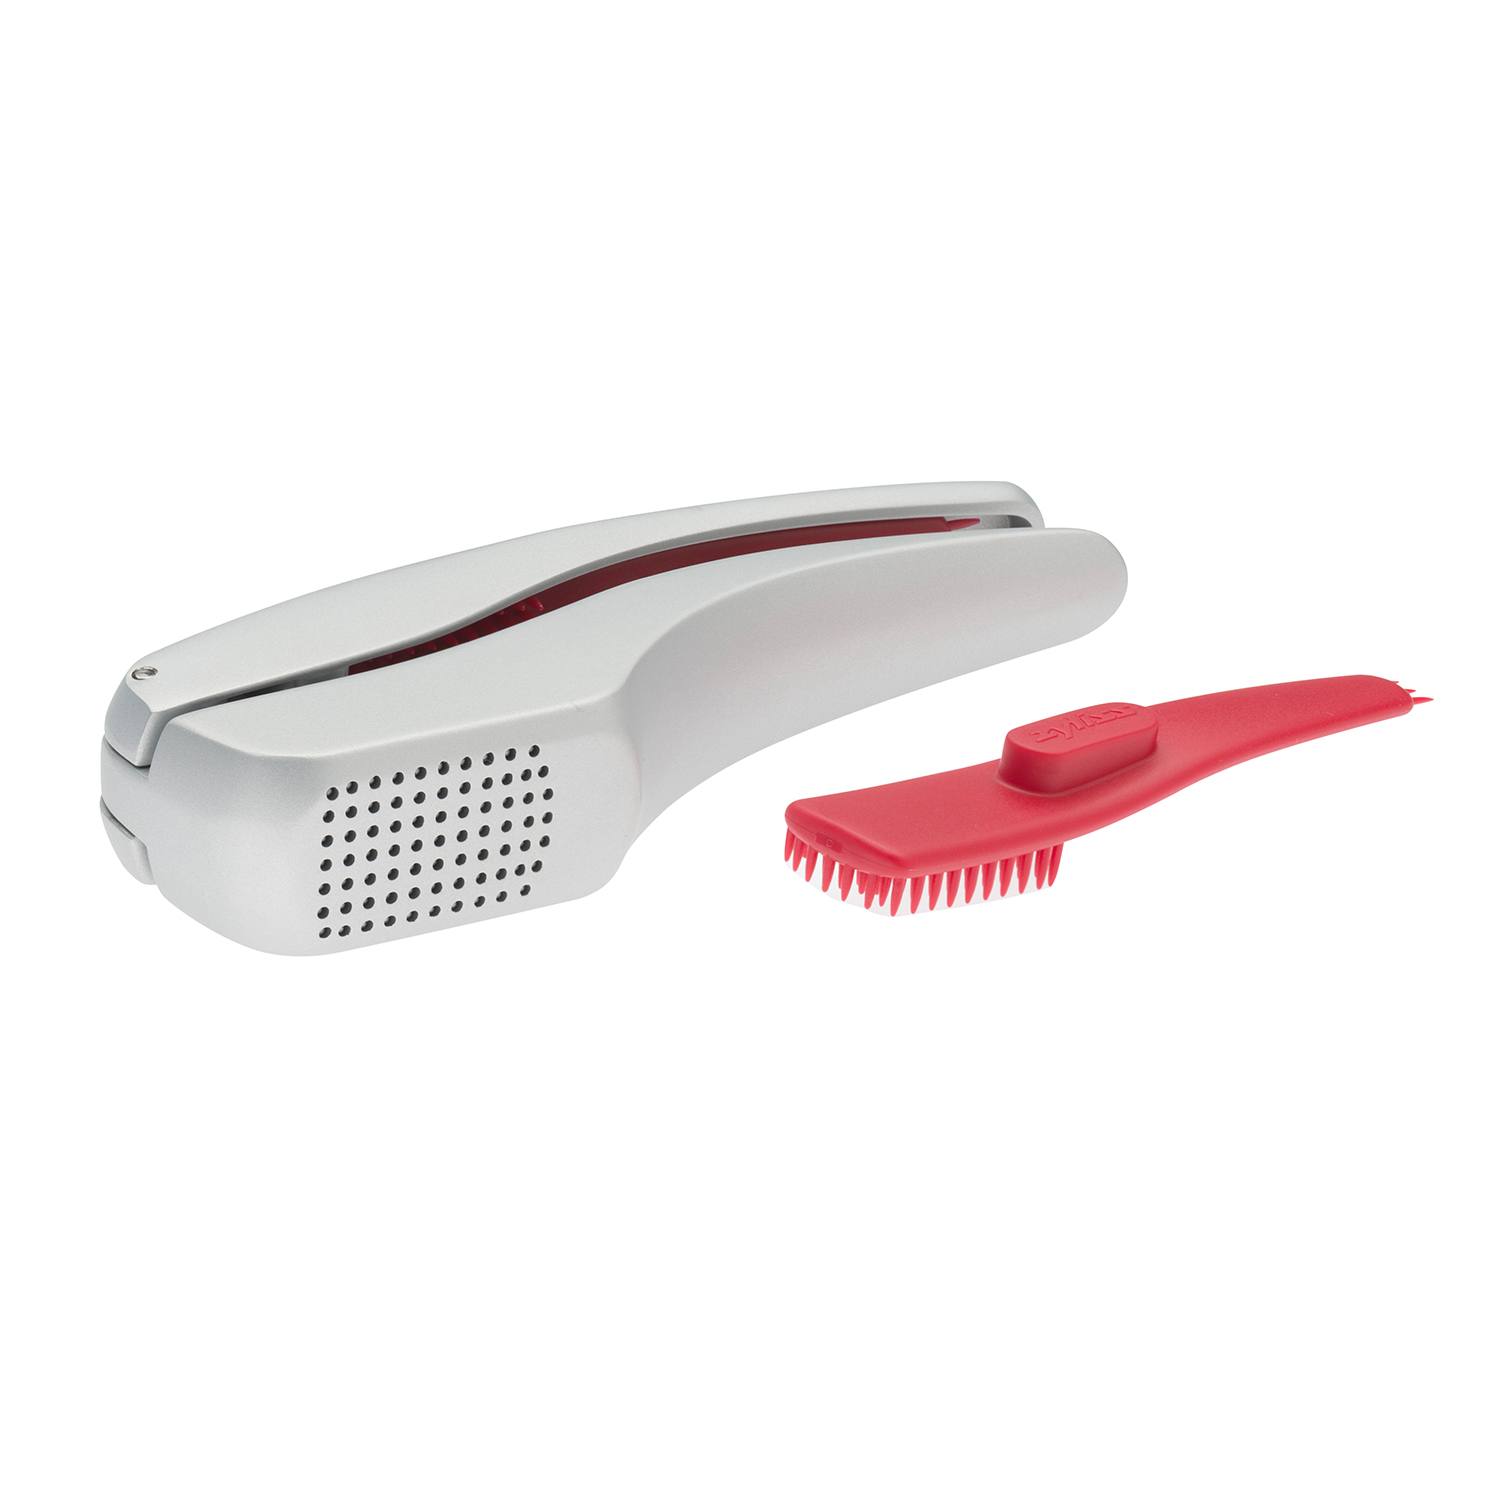 Zyliss Susi 3 Garlic Press Built in Cleaner - Crush, Mince and Peeler, Silver Aluminum Dishwasher Safe - image 1 of 7